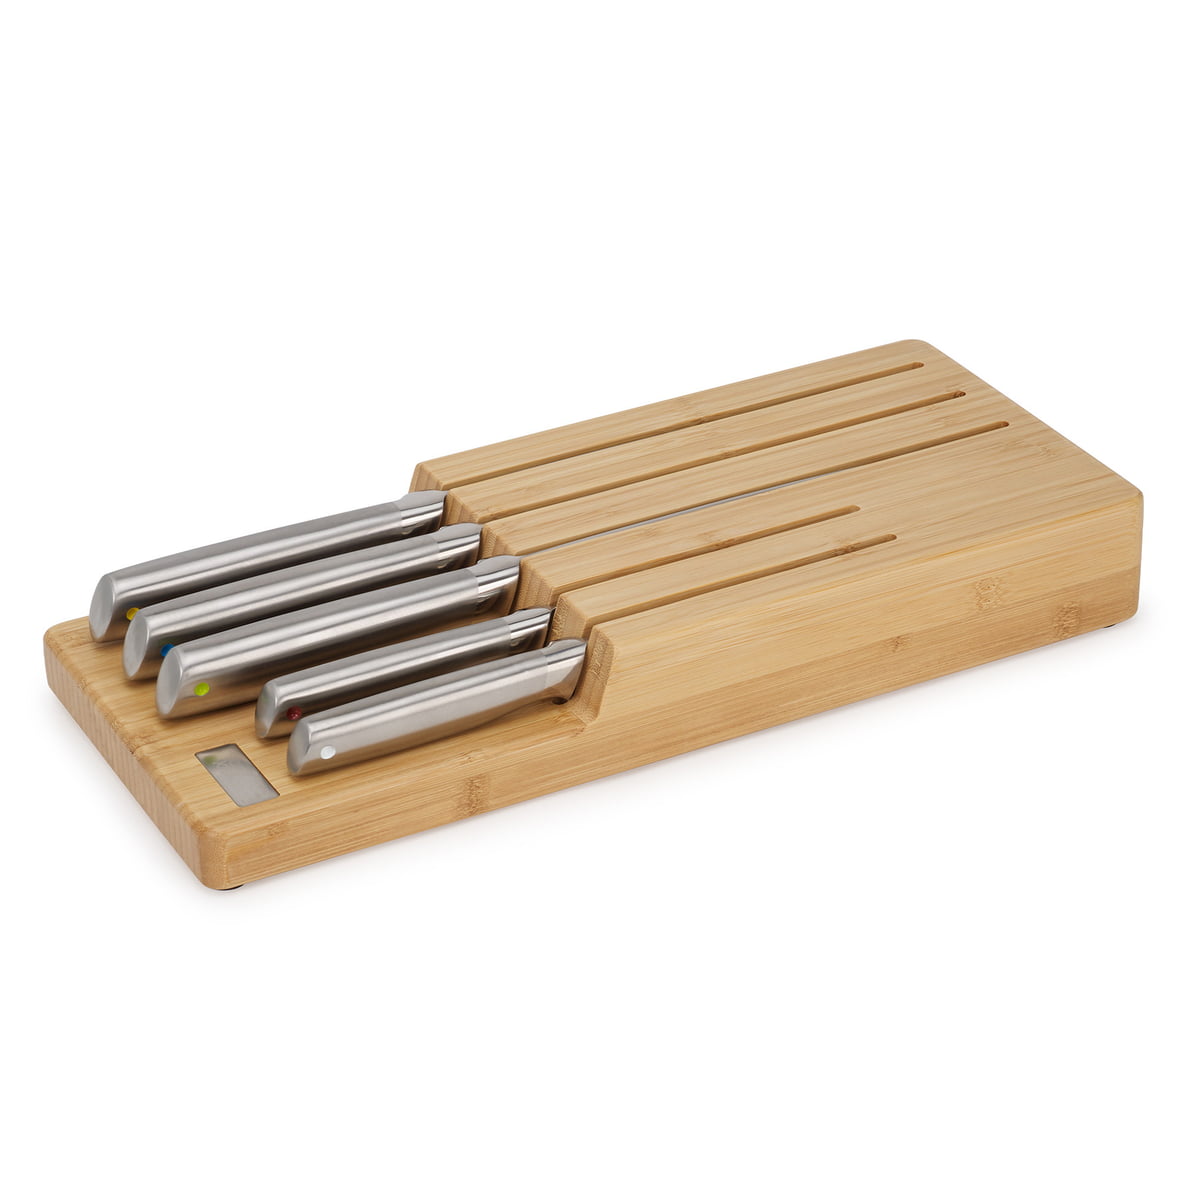 Joseph Joseph Elevate Knives Store 5-piece Knife Set with In-drawer Storage  Tray